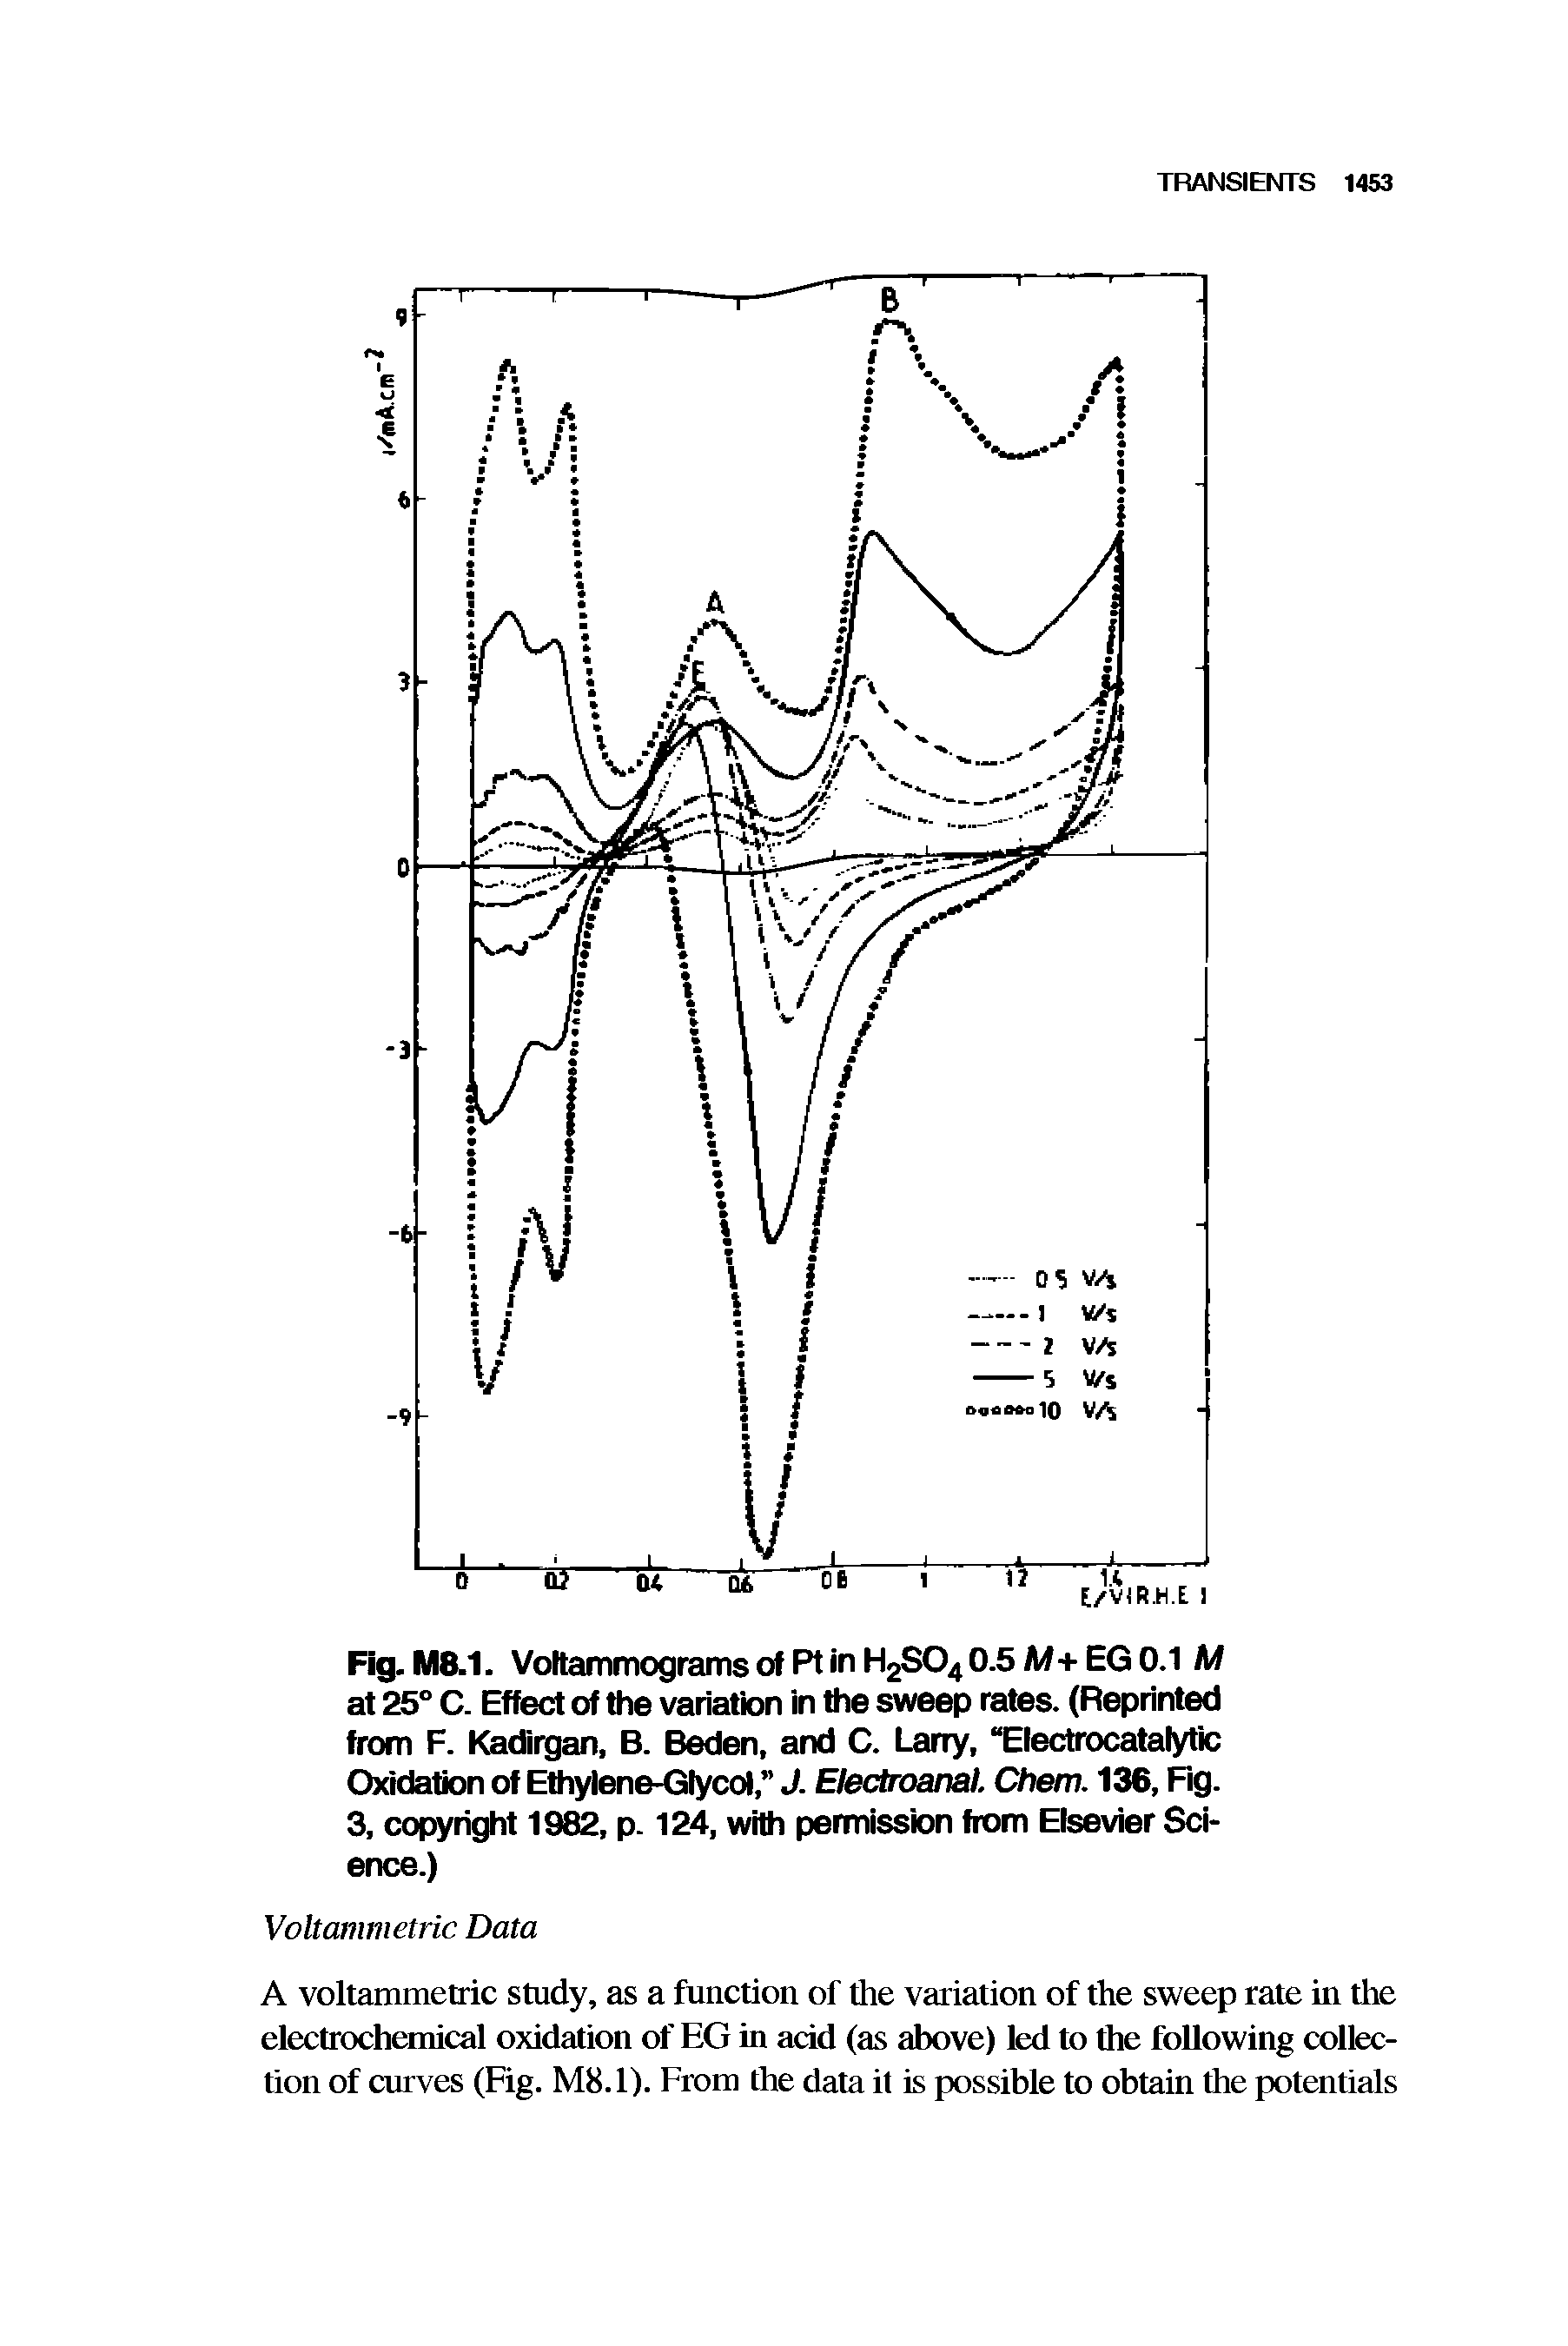 Fig. M8.1. Voltammograms of R in H2S04 0.5 M+EQ 0.1 M at 25° C. Effect of the variation in the sweep rates. (Reprinted from F. Kadirgan, B. Beden, and C. Larry, Electrocatalytic Oxidation of Ethylene-Glycol, J. Electroansi. Chem. 136, Fig.